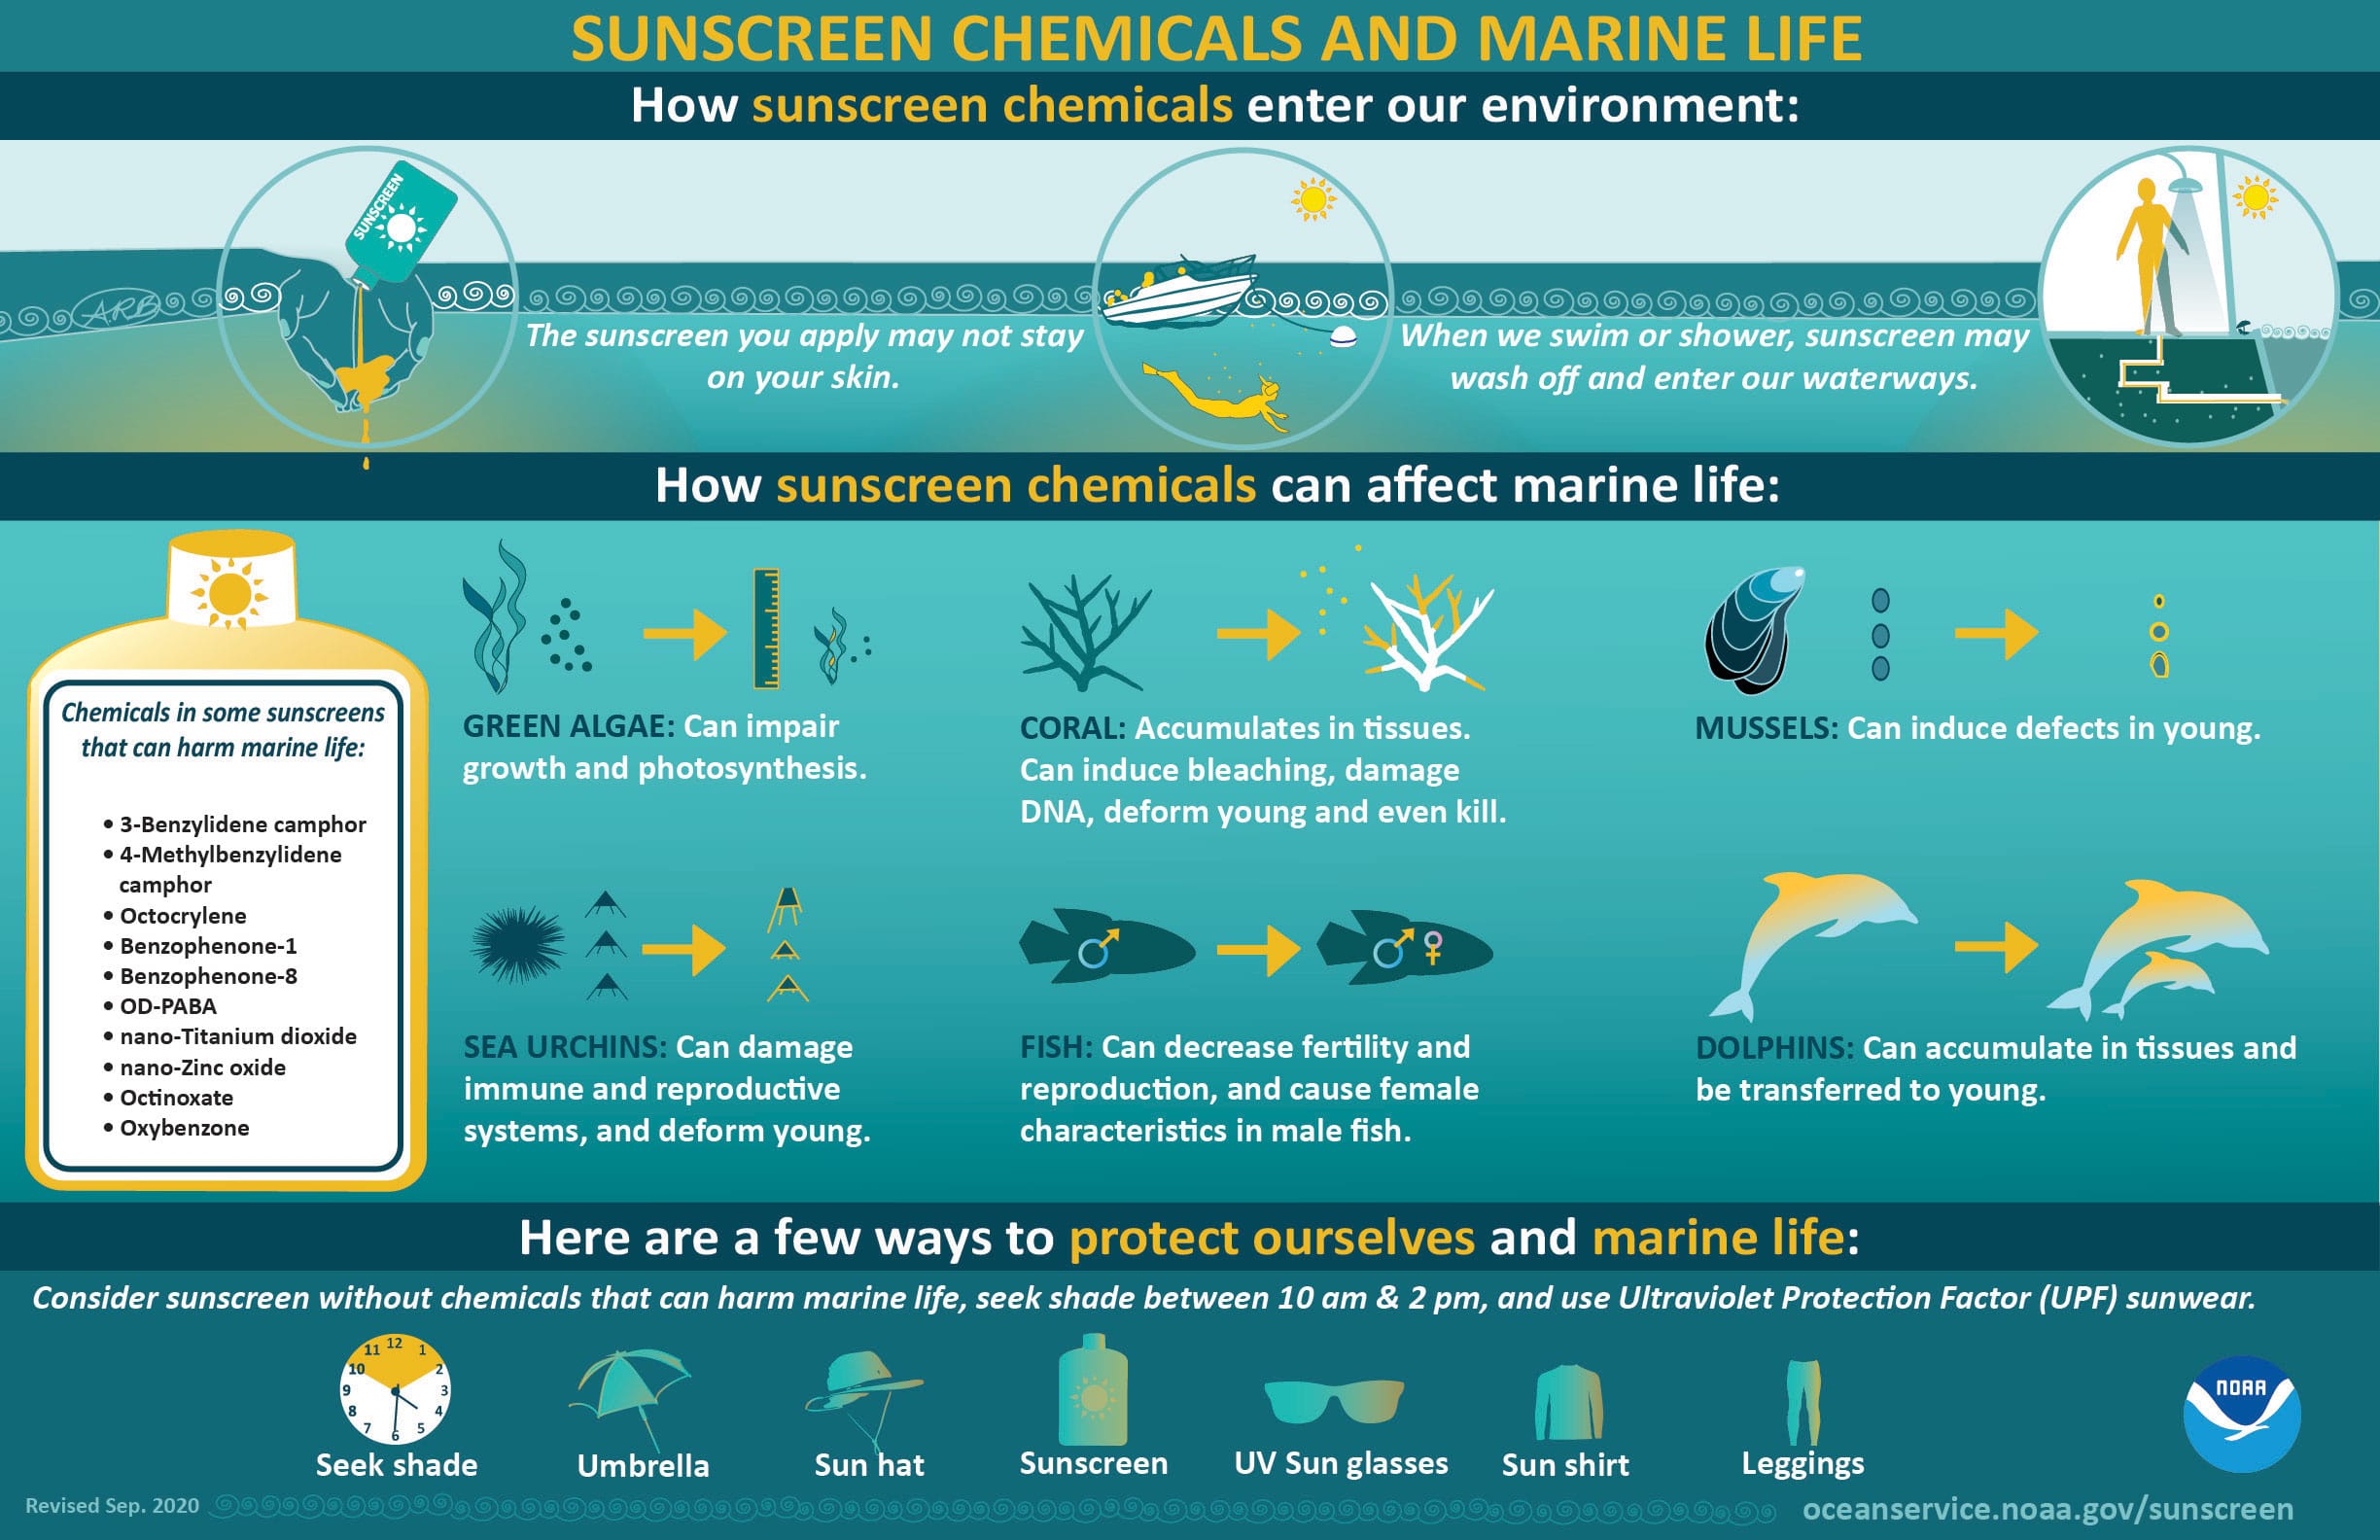 infographic showing how sunscreen enters the marine environment and effects some chemicals cause